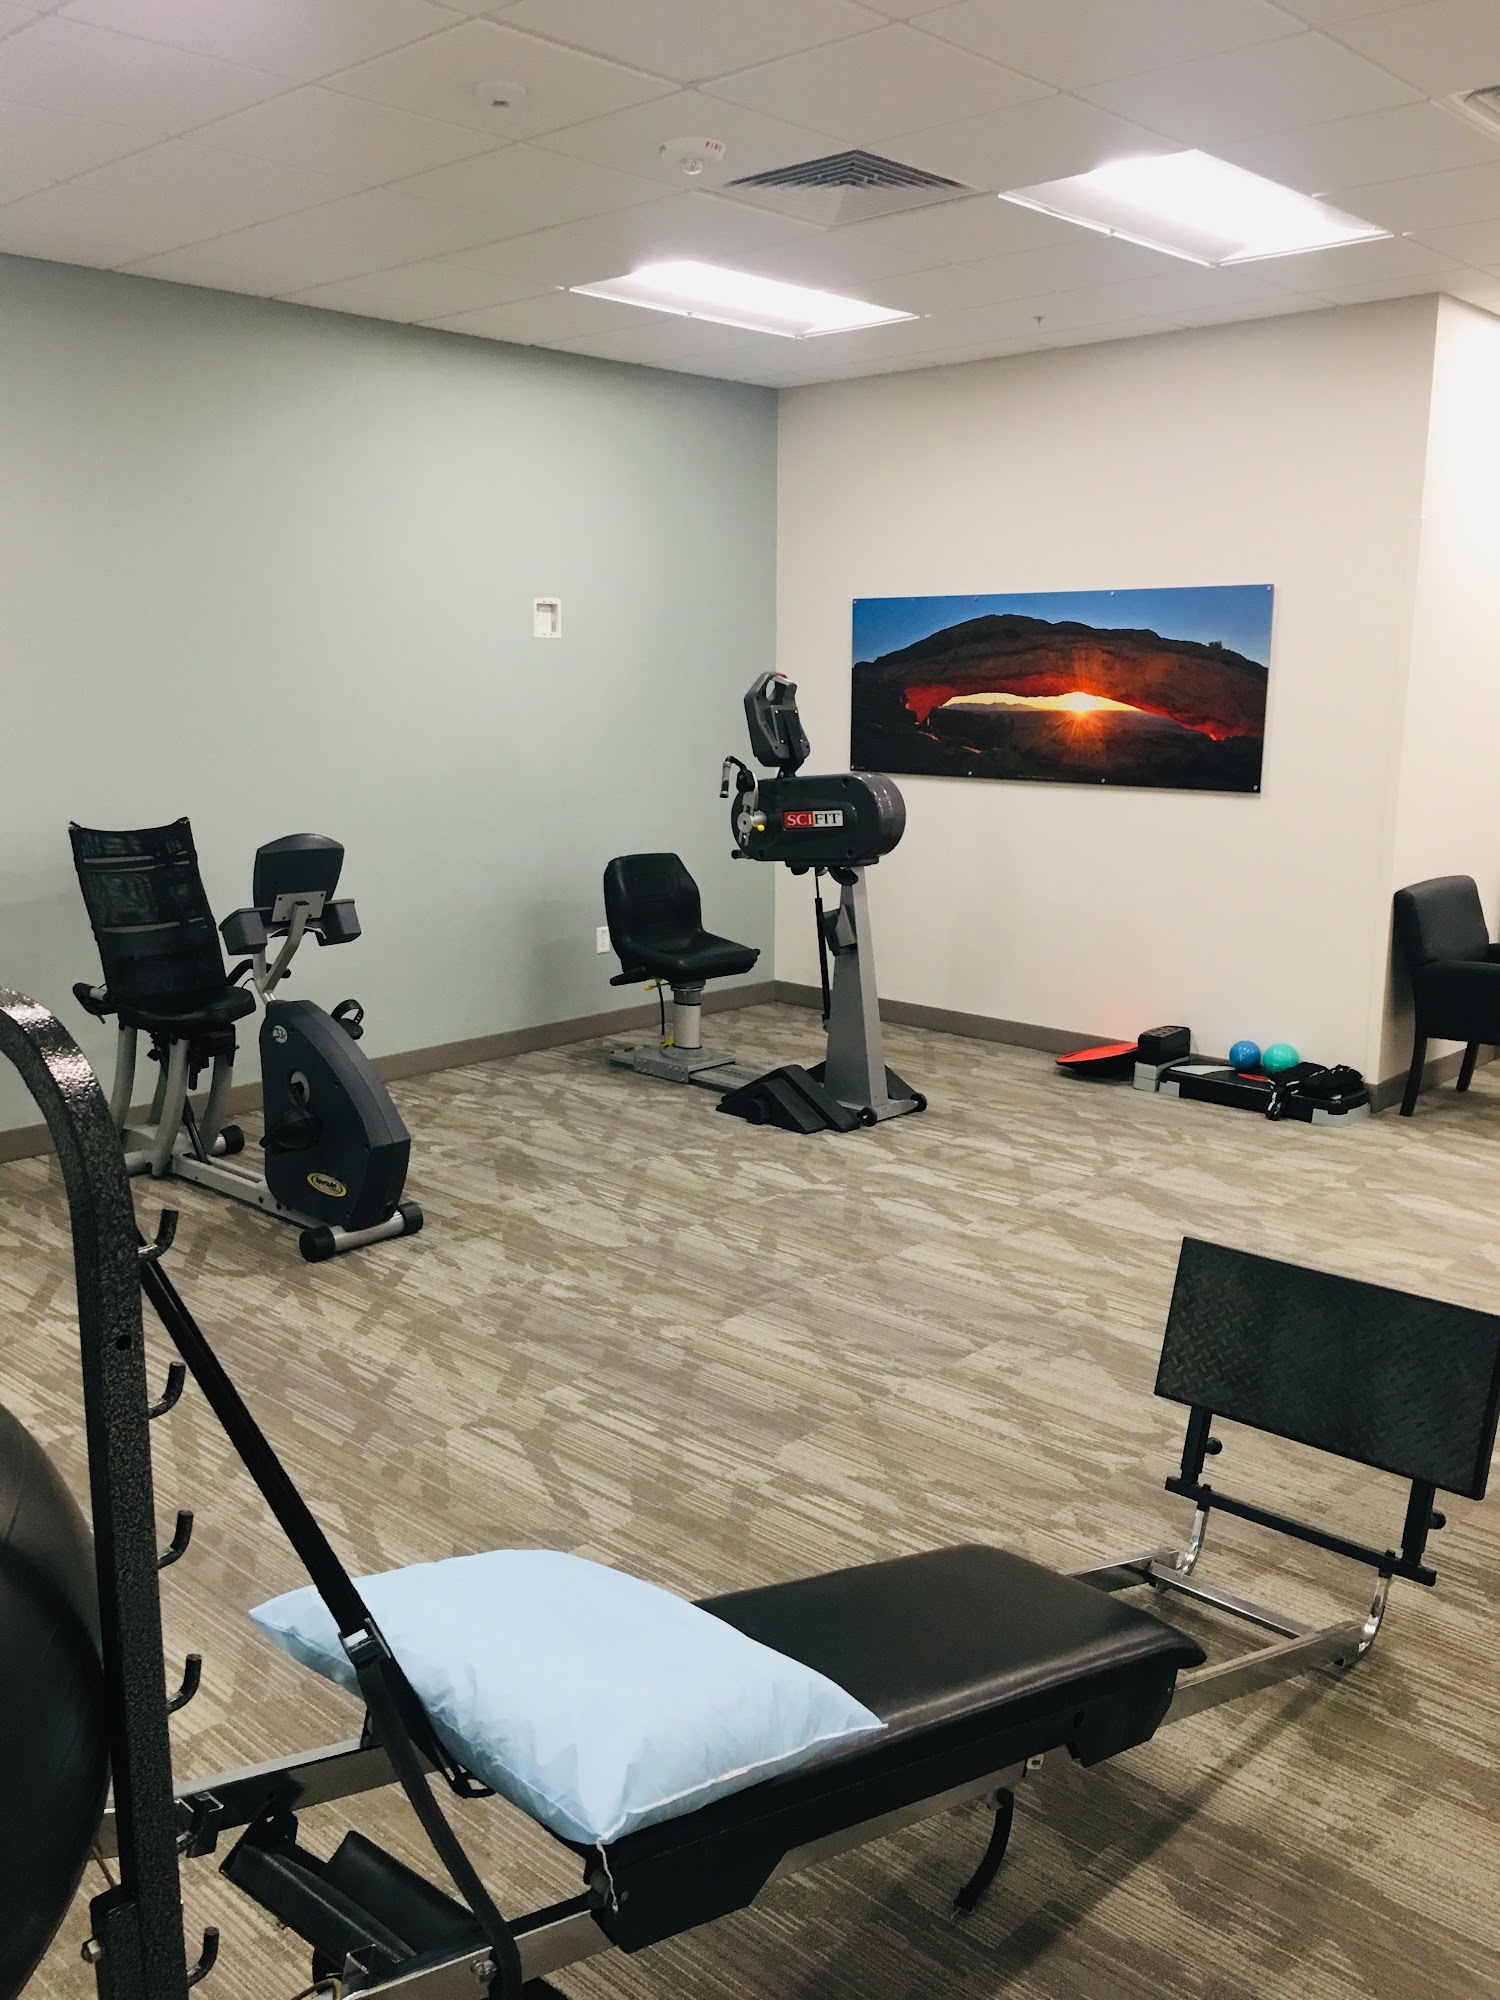 PerformanceWest Physical Therapy - West Point 145 S 3000 W, West Point Utah 84015